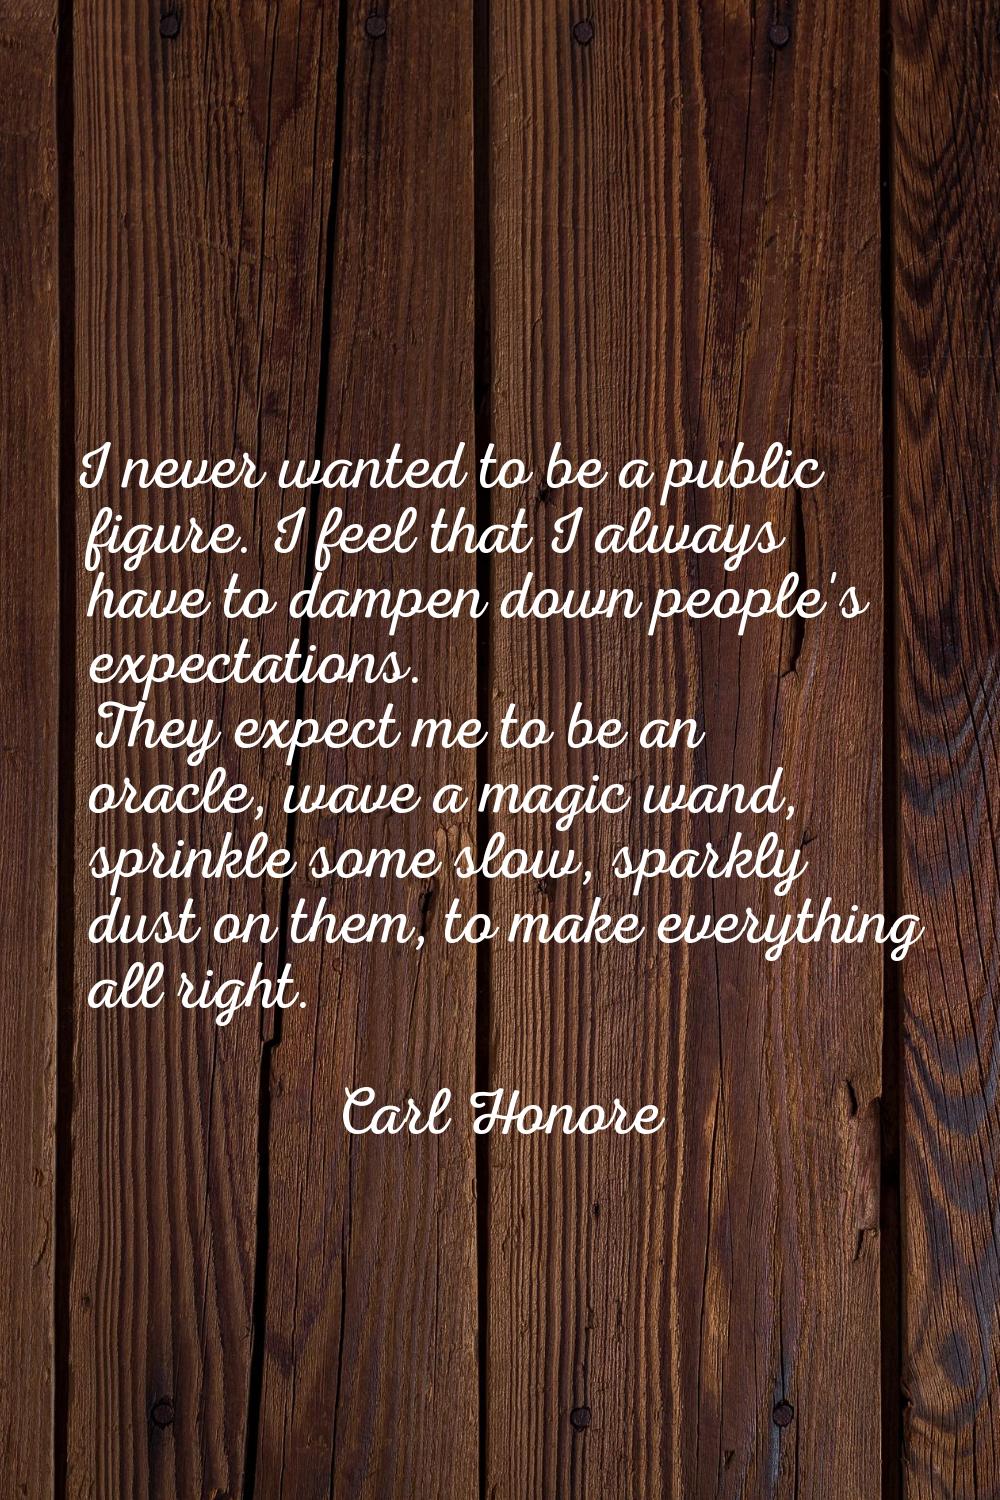 I never wanted to be a public figure. I feel that I always have to dampen down people's expectation